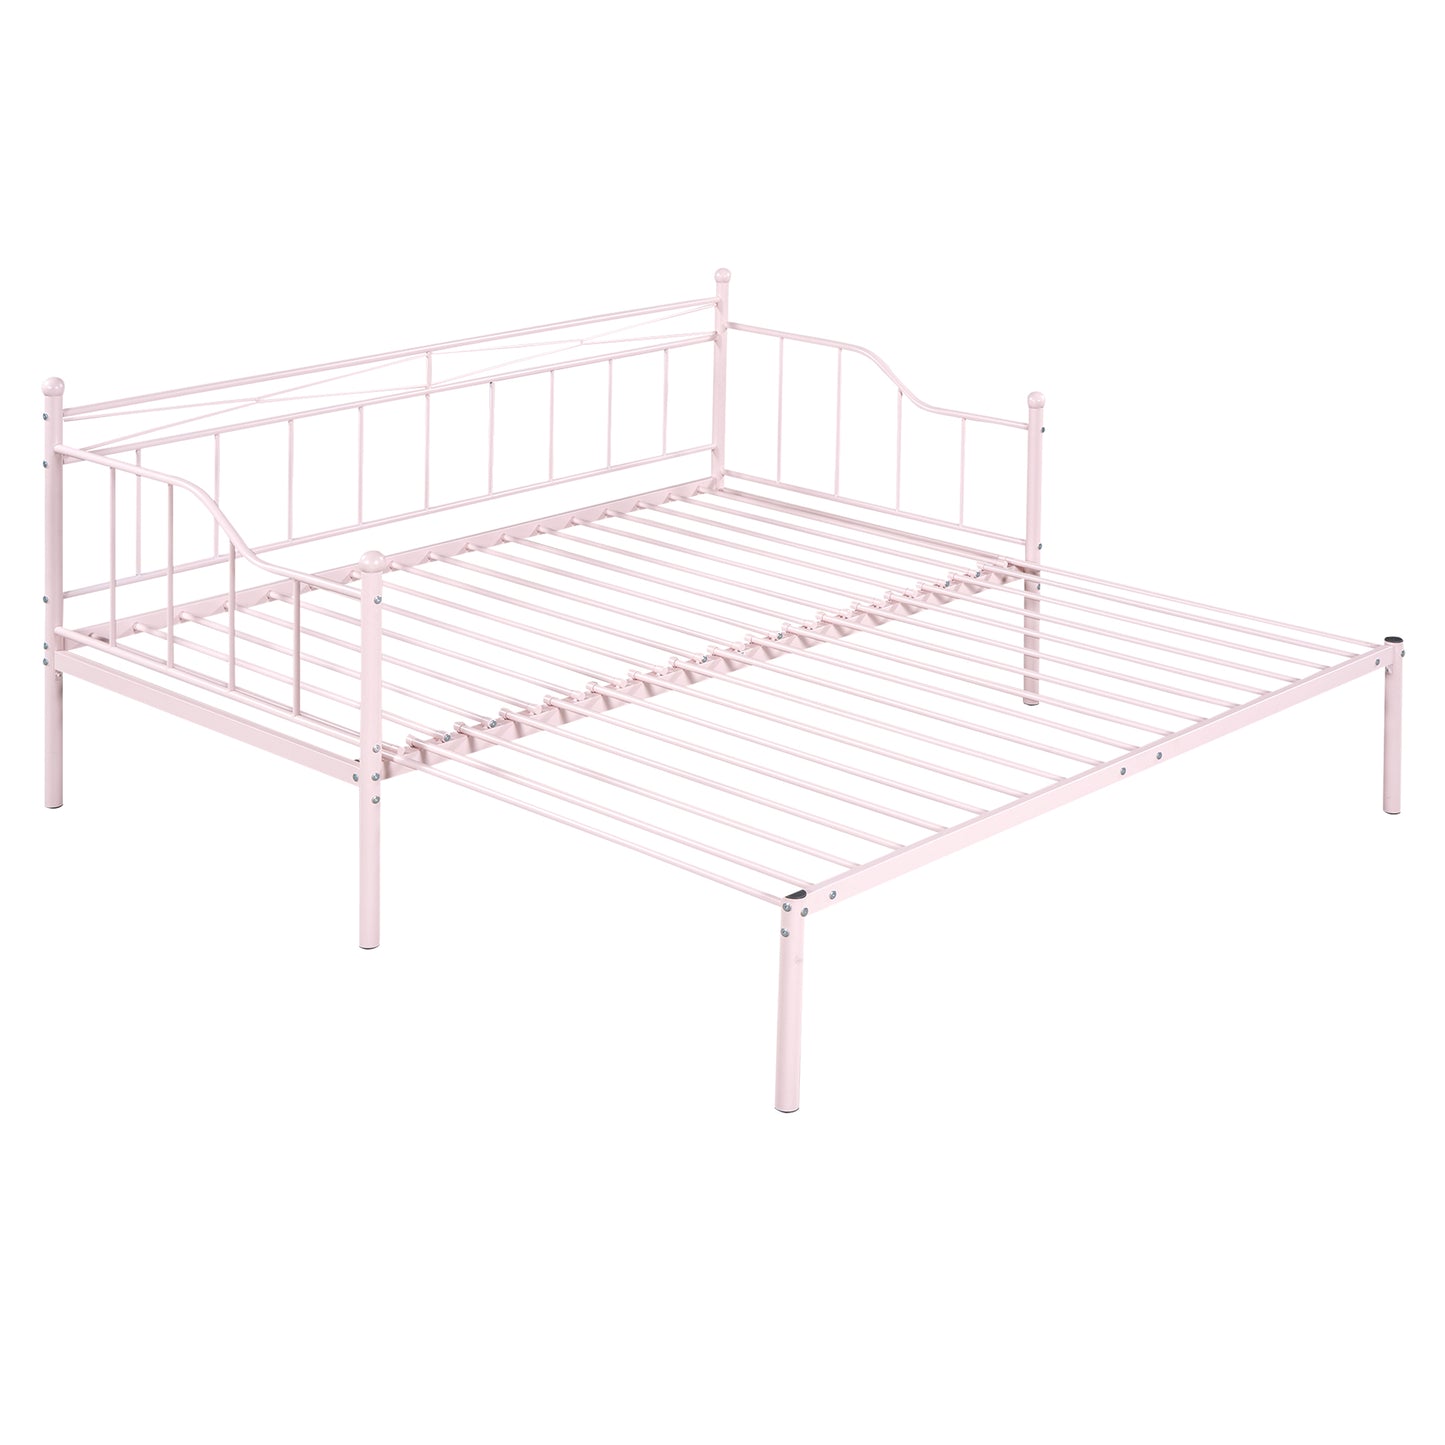 HSUNNS Twin Size Metal Frame Daybed with Pullout Trundle, Heavy Duty Steel Slat Support Sofa Bed Trundle Bed for Kids Boys Girls Teens Adults Guests, No Spring Box Needed, Pink